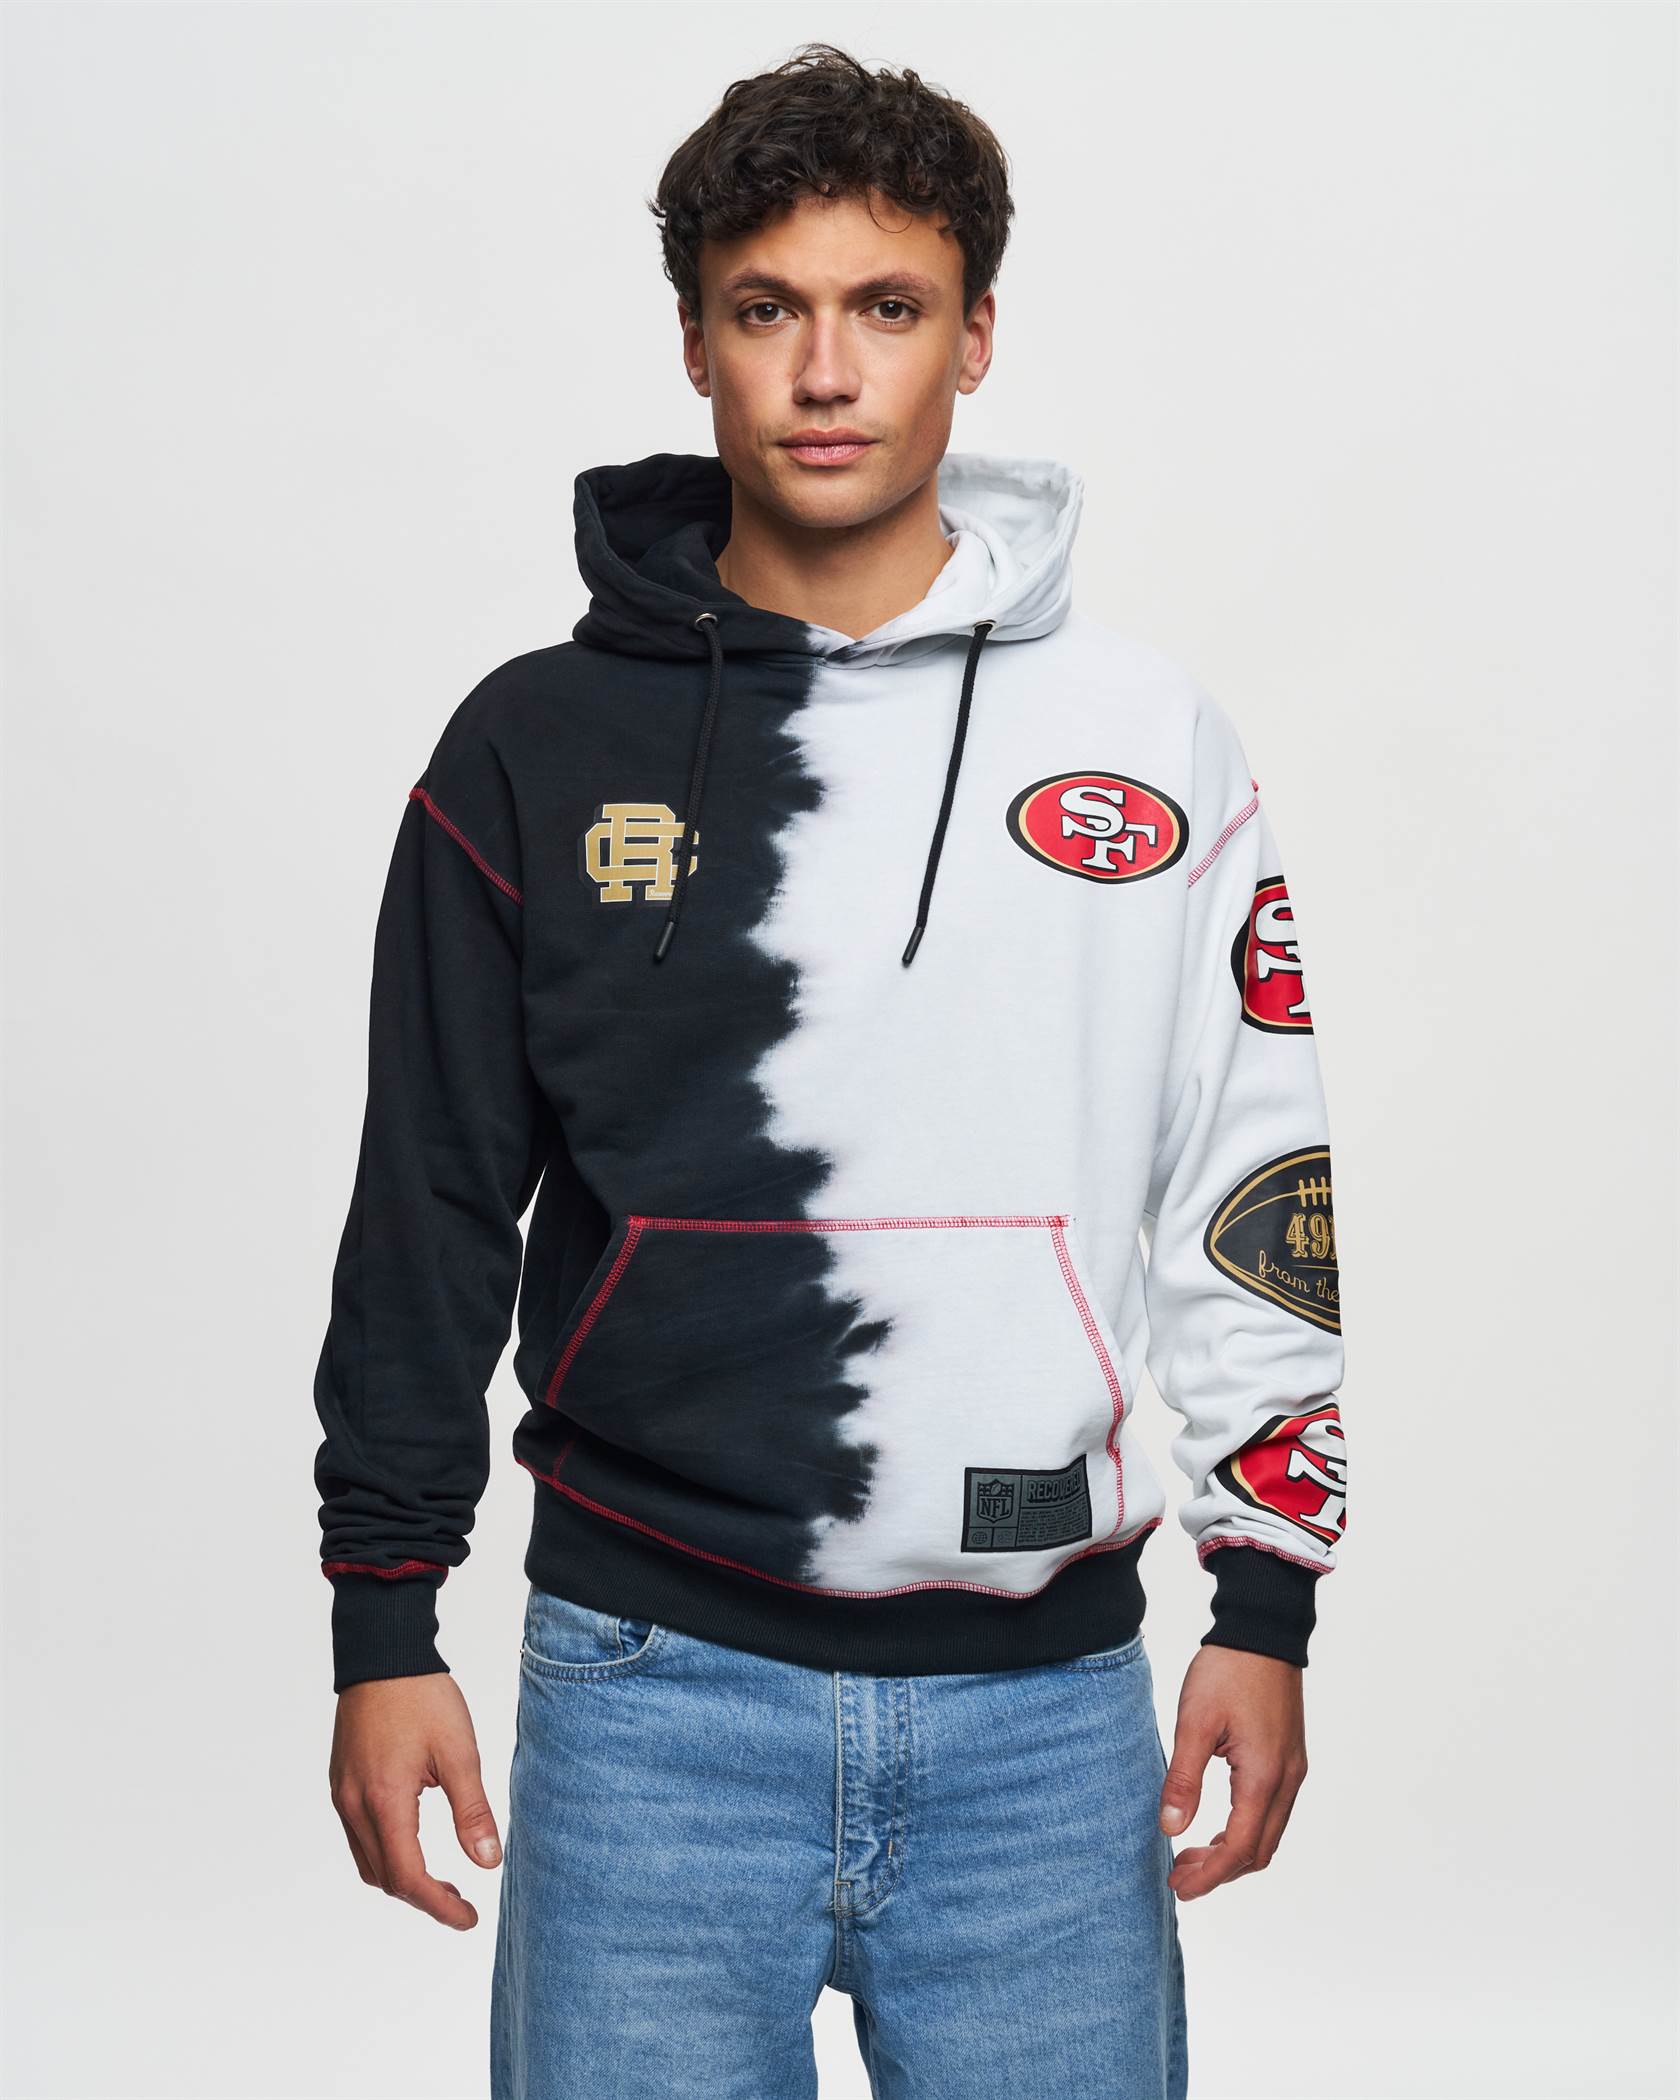 San Francisco 49ers NFL Ink Dye Effect Black on White Hoody Recovered